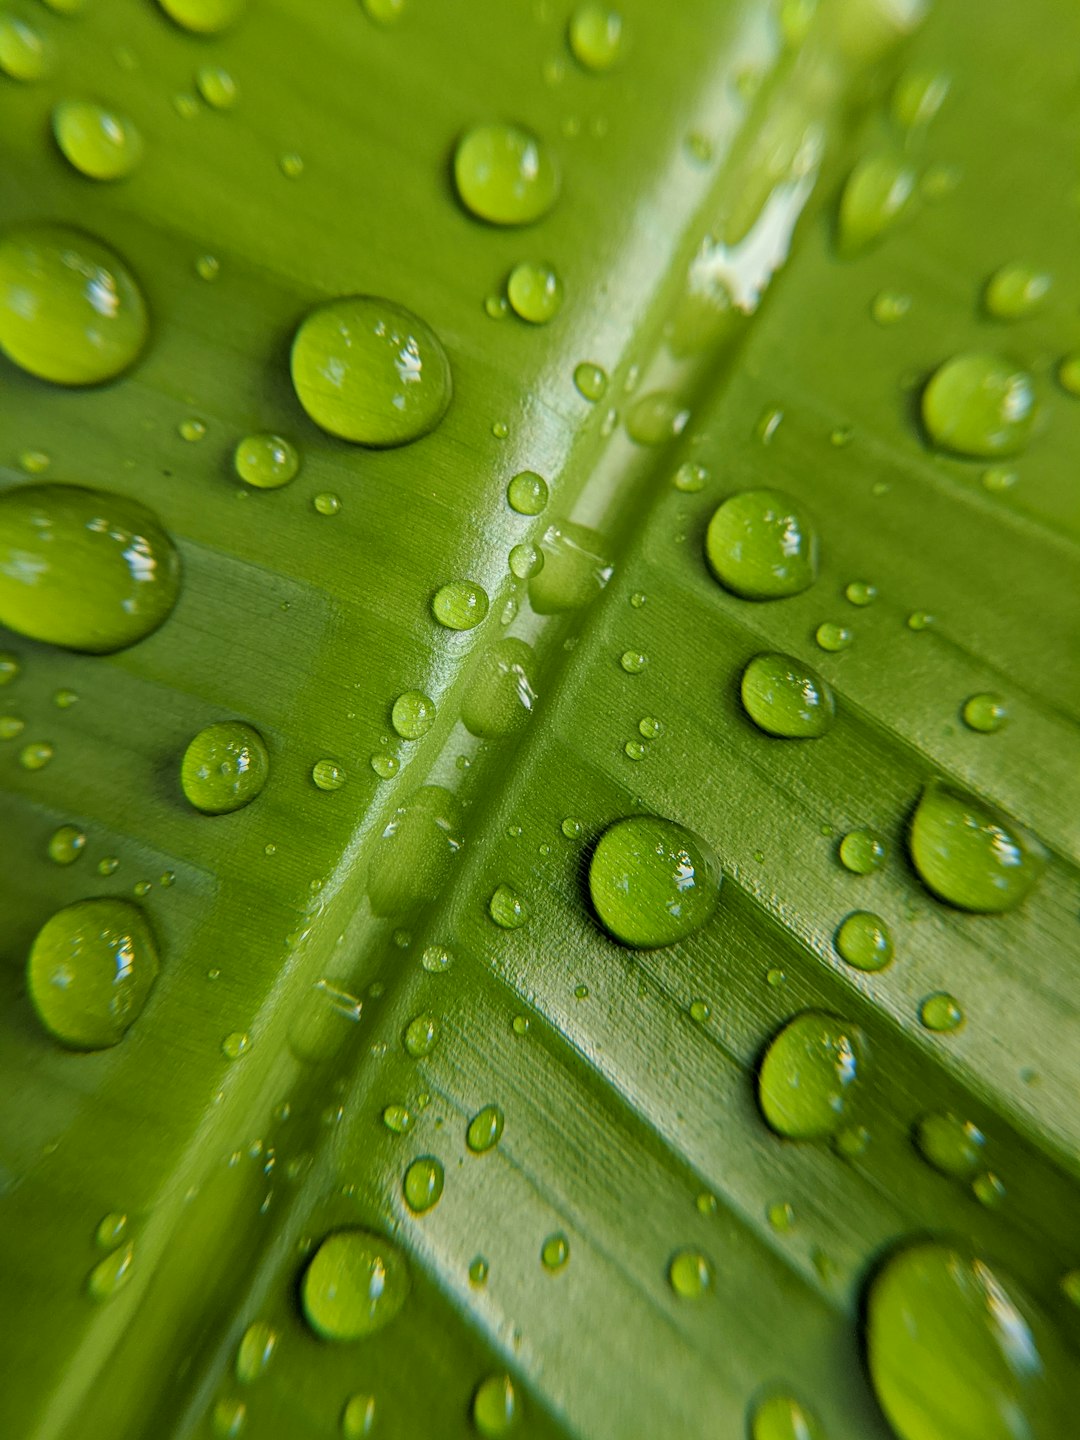 spotted dumb cane, plant, water droplets on green leaf